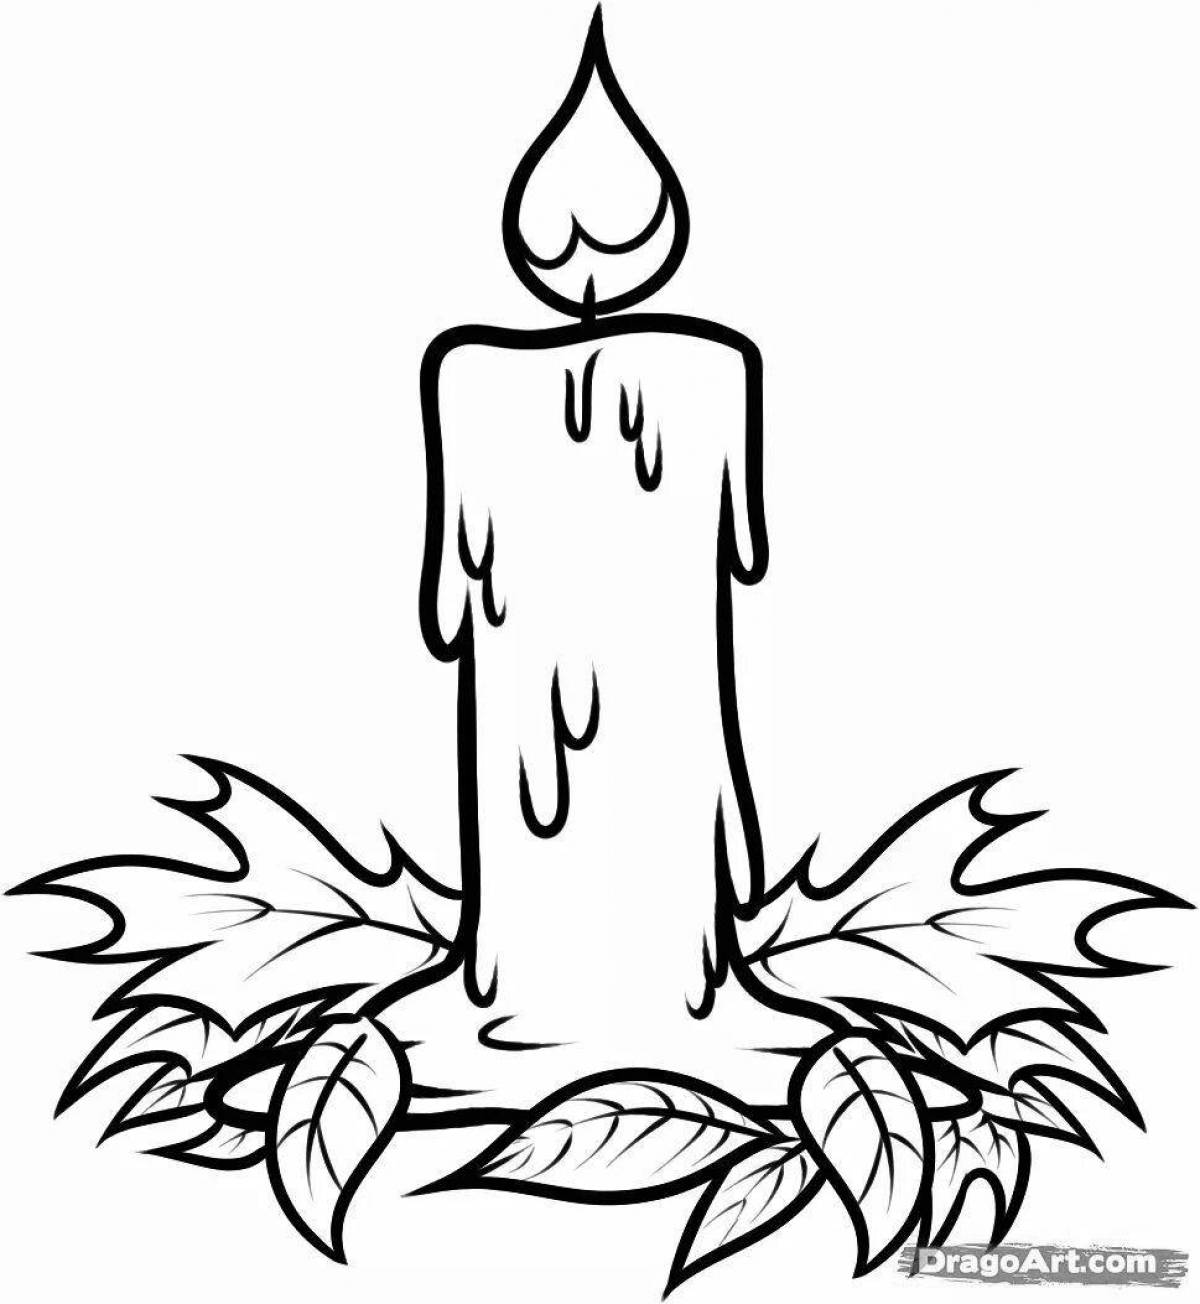 Coloring candle of blessed memory